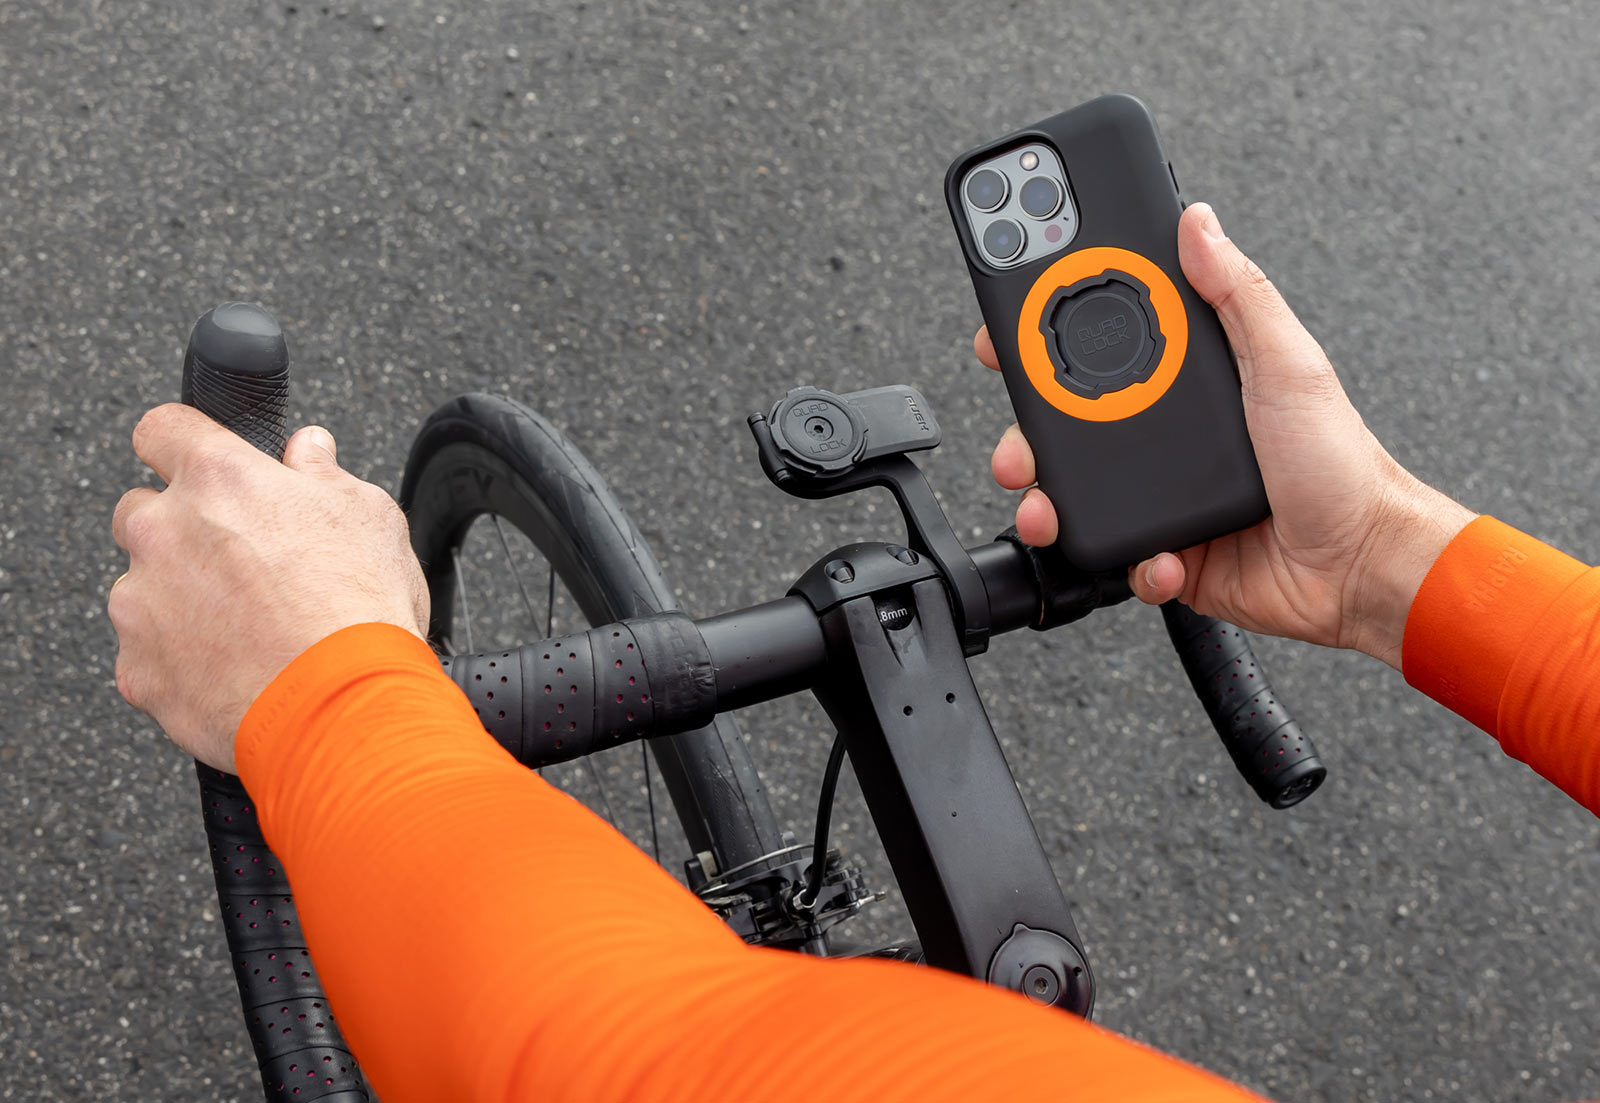 Hands On Bike: Quad Lock Mag Case and Wireless Charging Pad